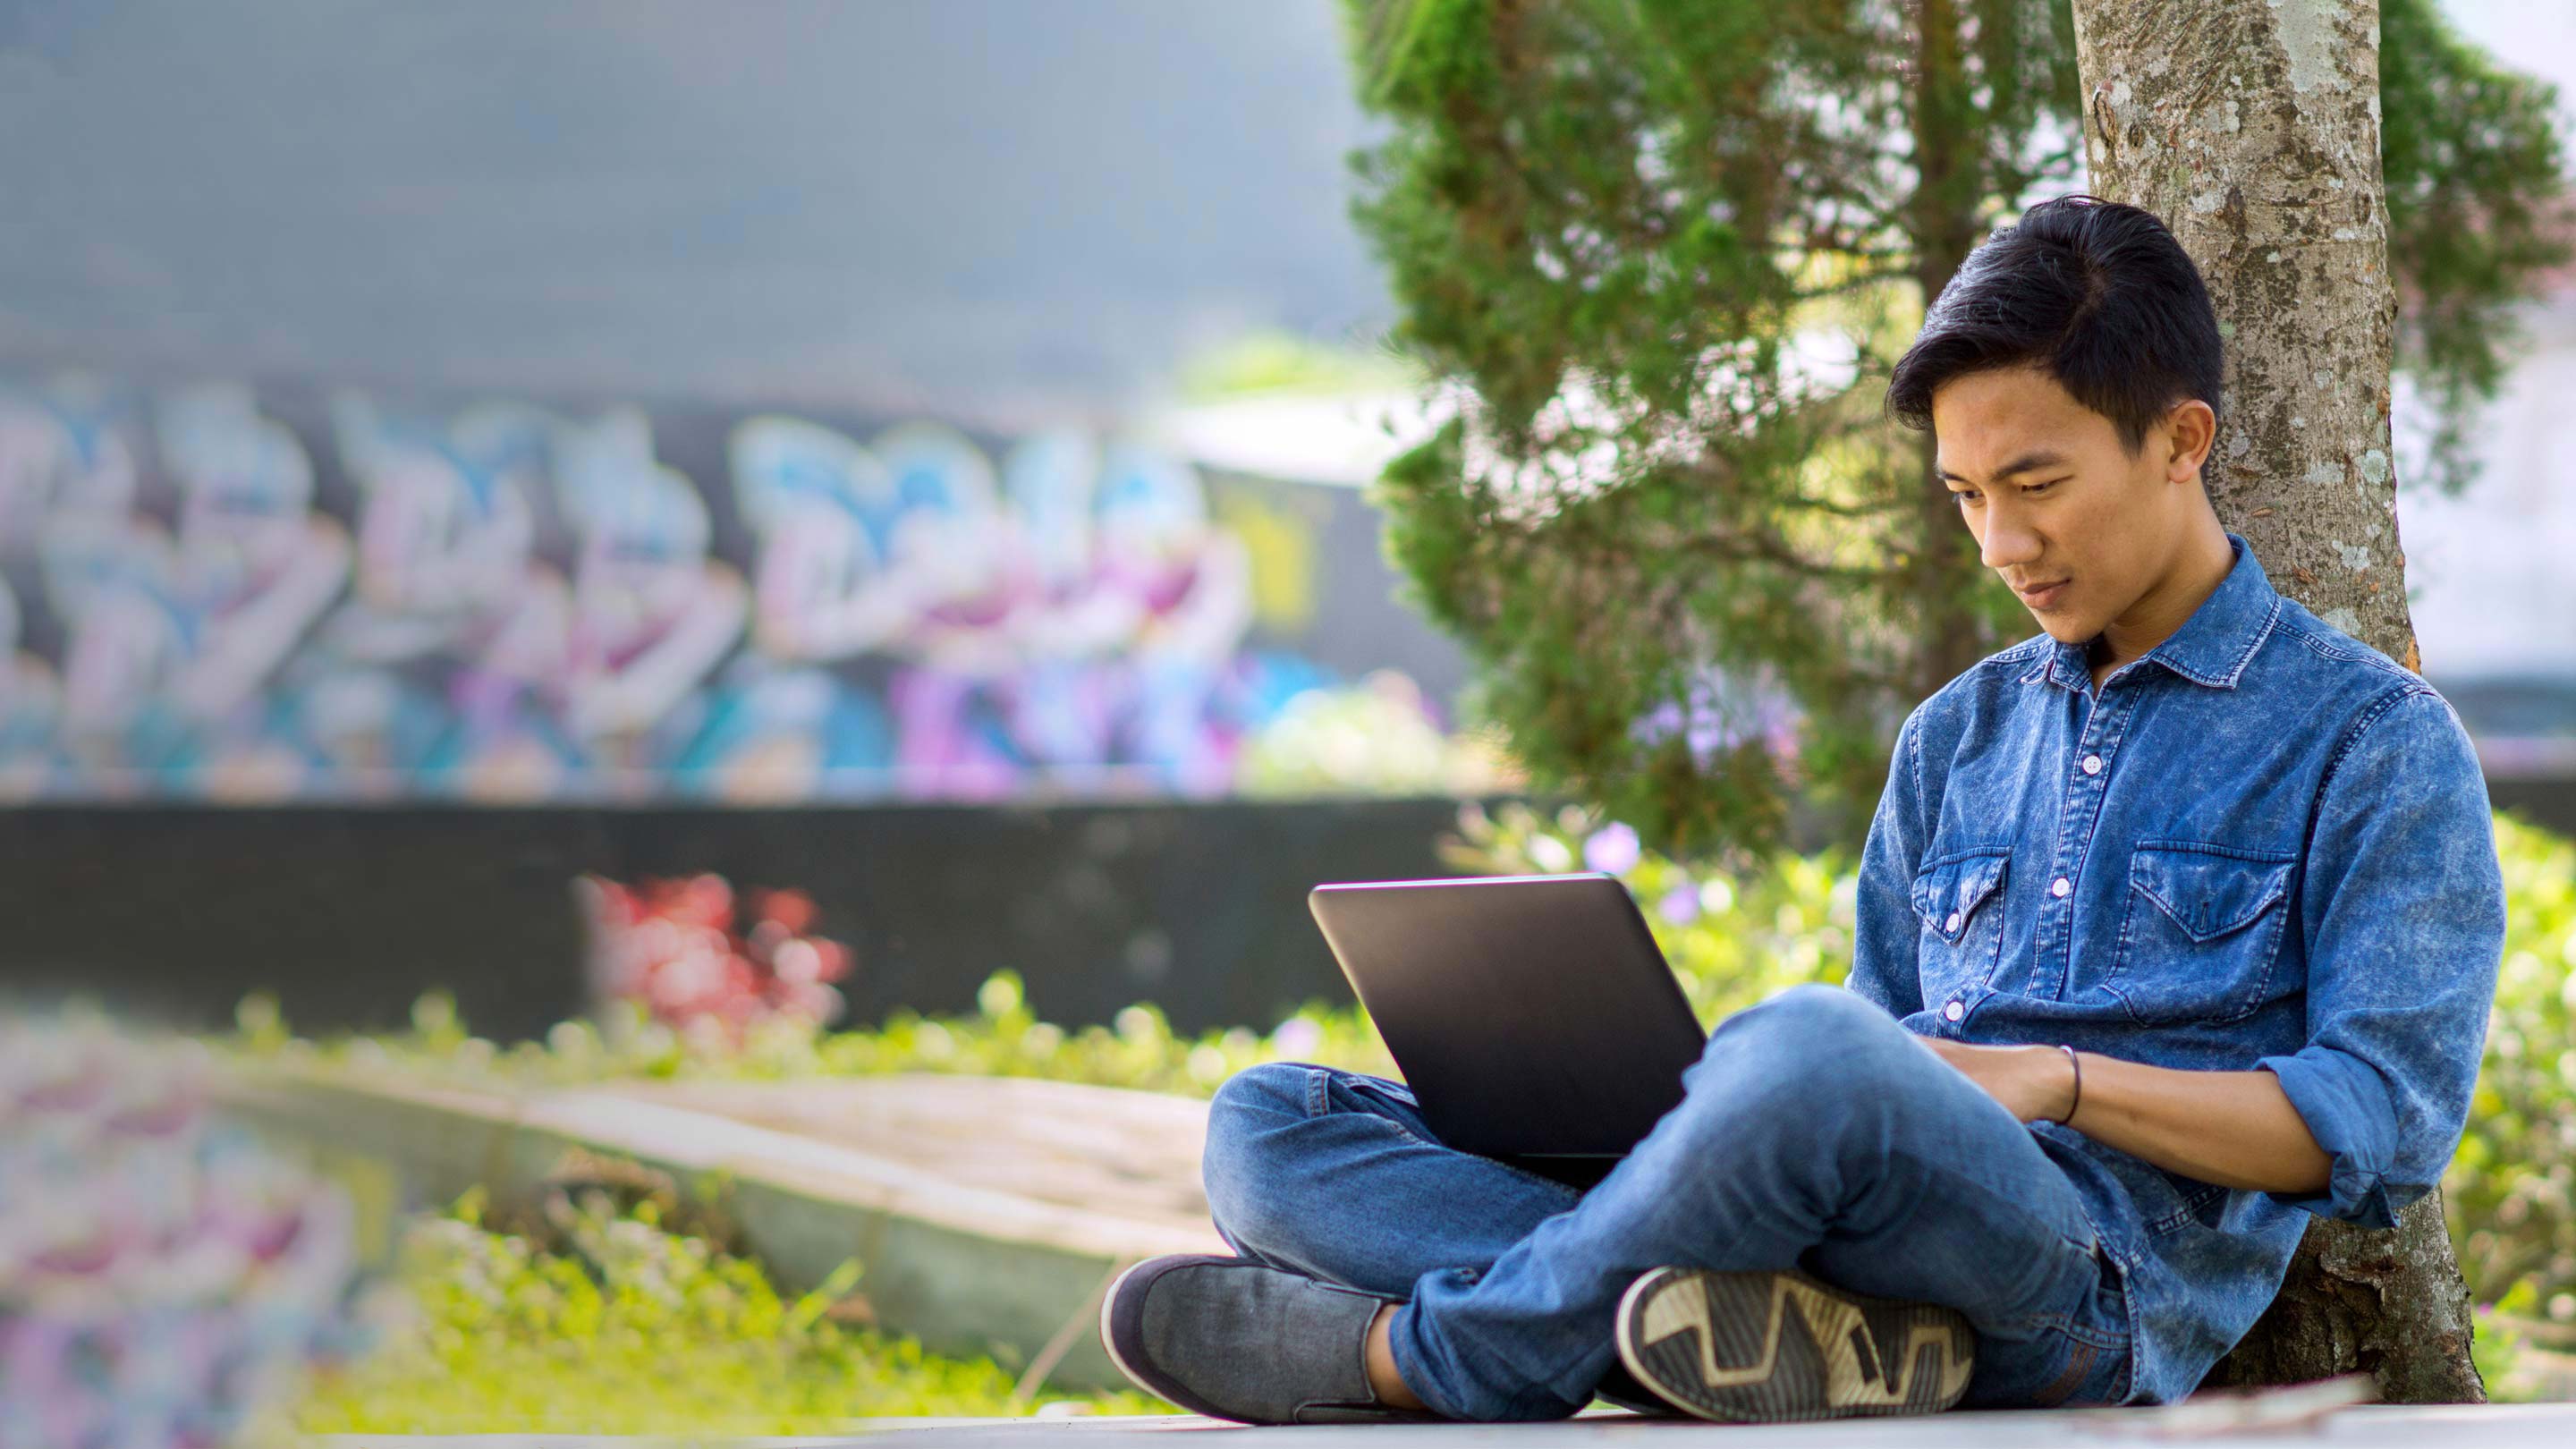 A person sitting under a tree using a laptop